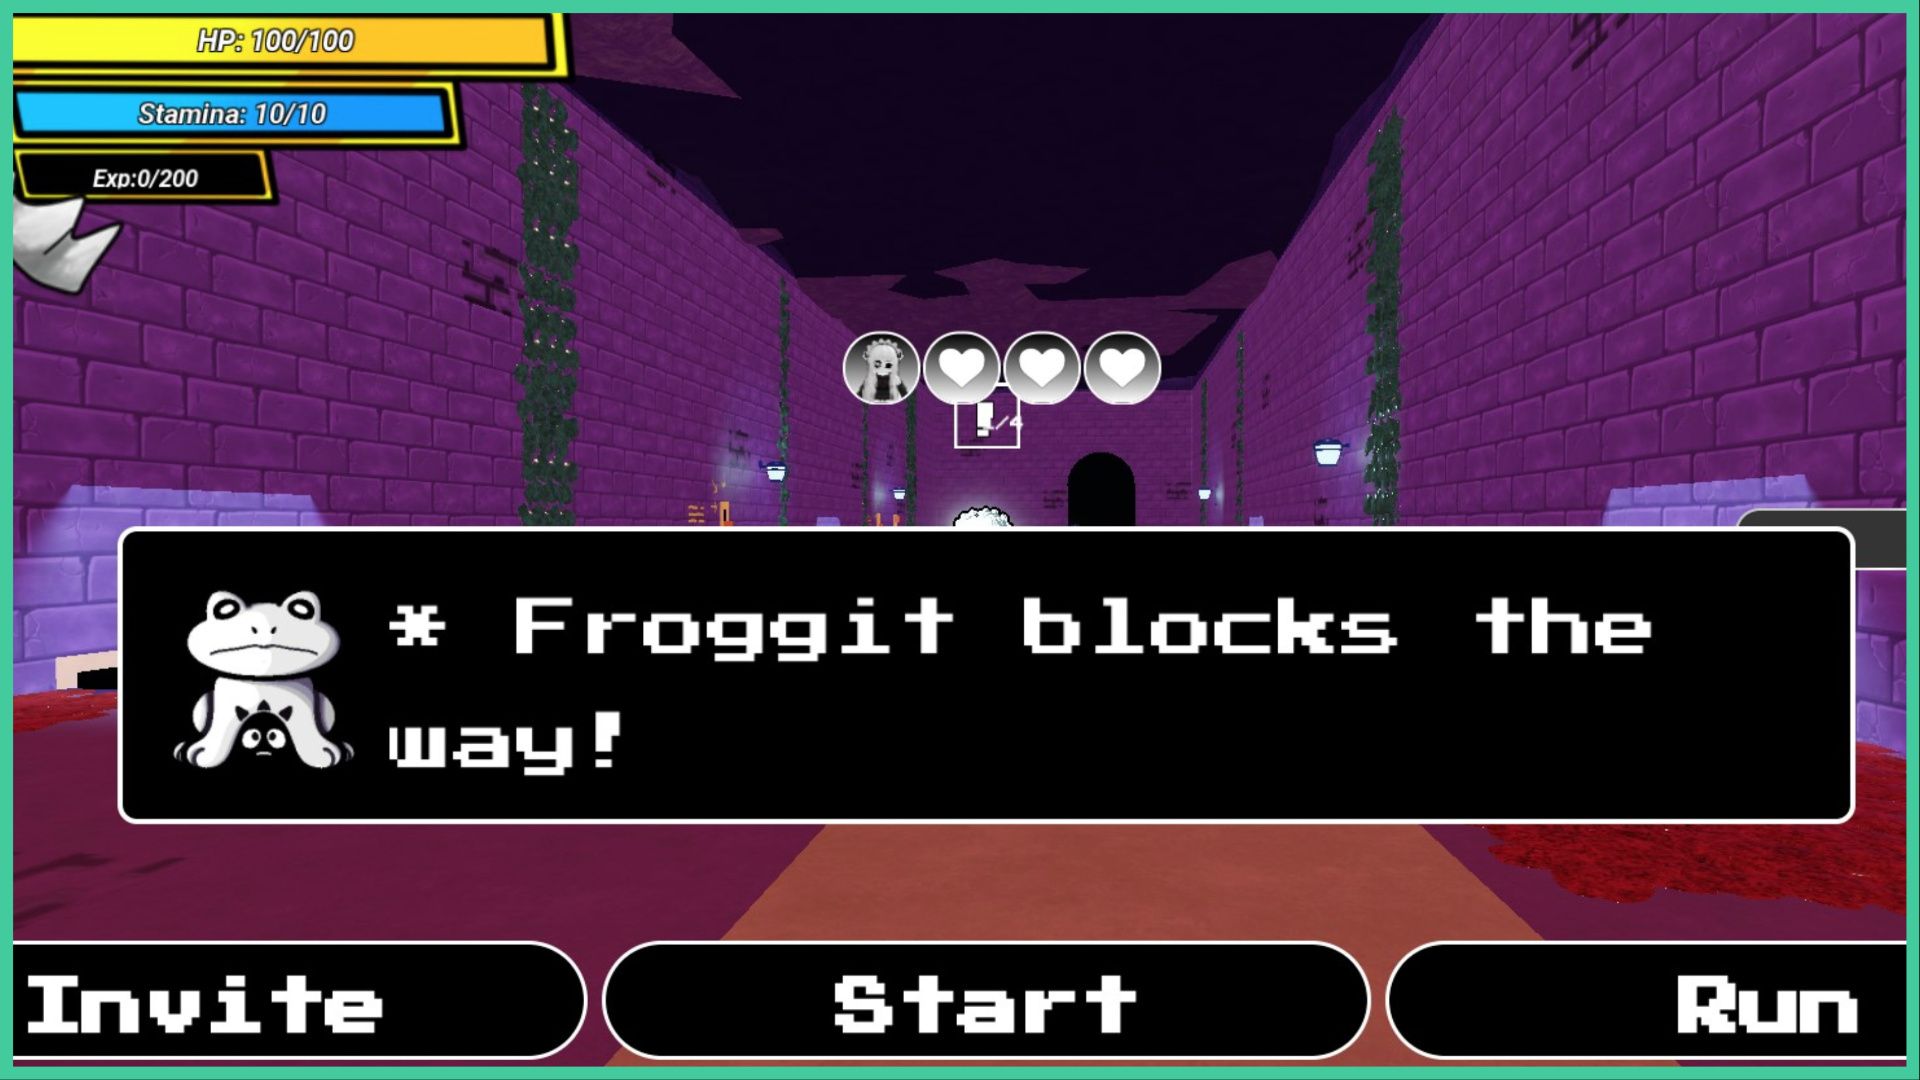 feature image for our underworld realm drops guide, the image features a screenshot of a commencing battle from the game, with the text "froggit blocks the way" with a drawing of the froggit enemy to the side, there are three buttons to choose from 'invite', 'start', and 'run', the background is of a stone dungeon with plants on the walls and lanterns, the players HP, stamina, and EXP bars are in the top left